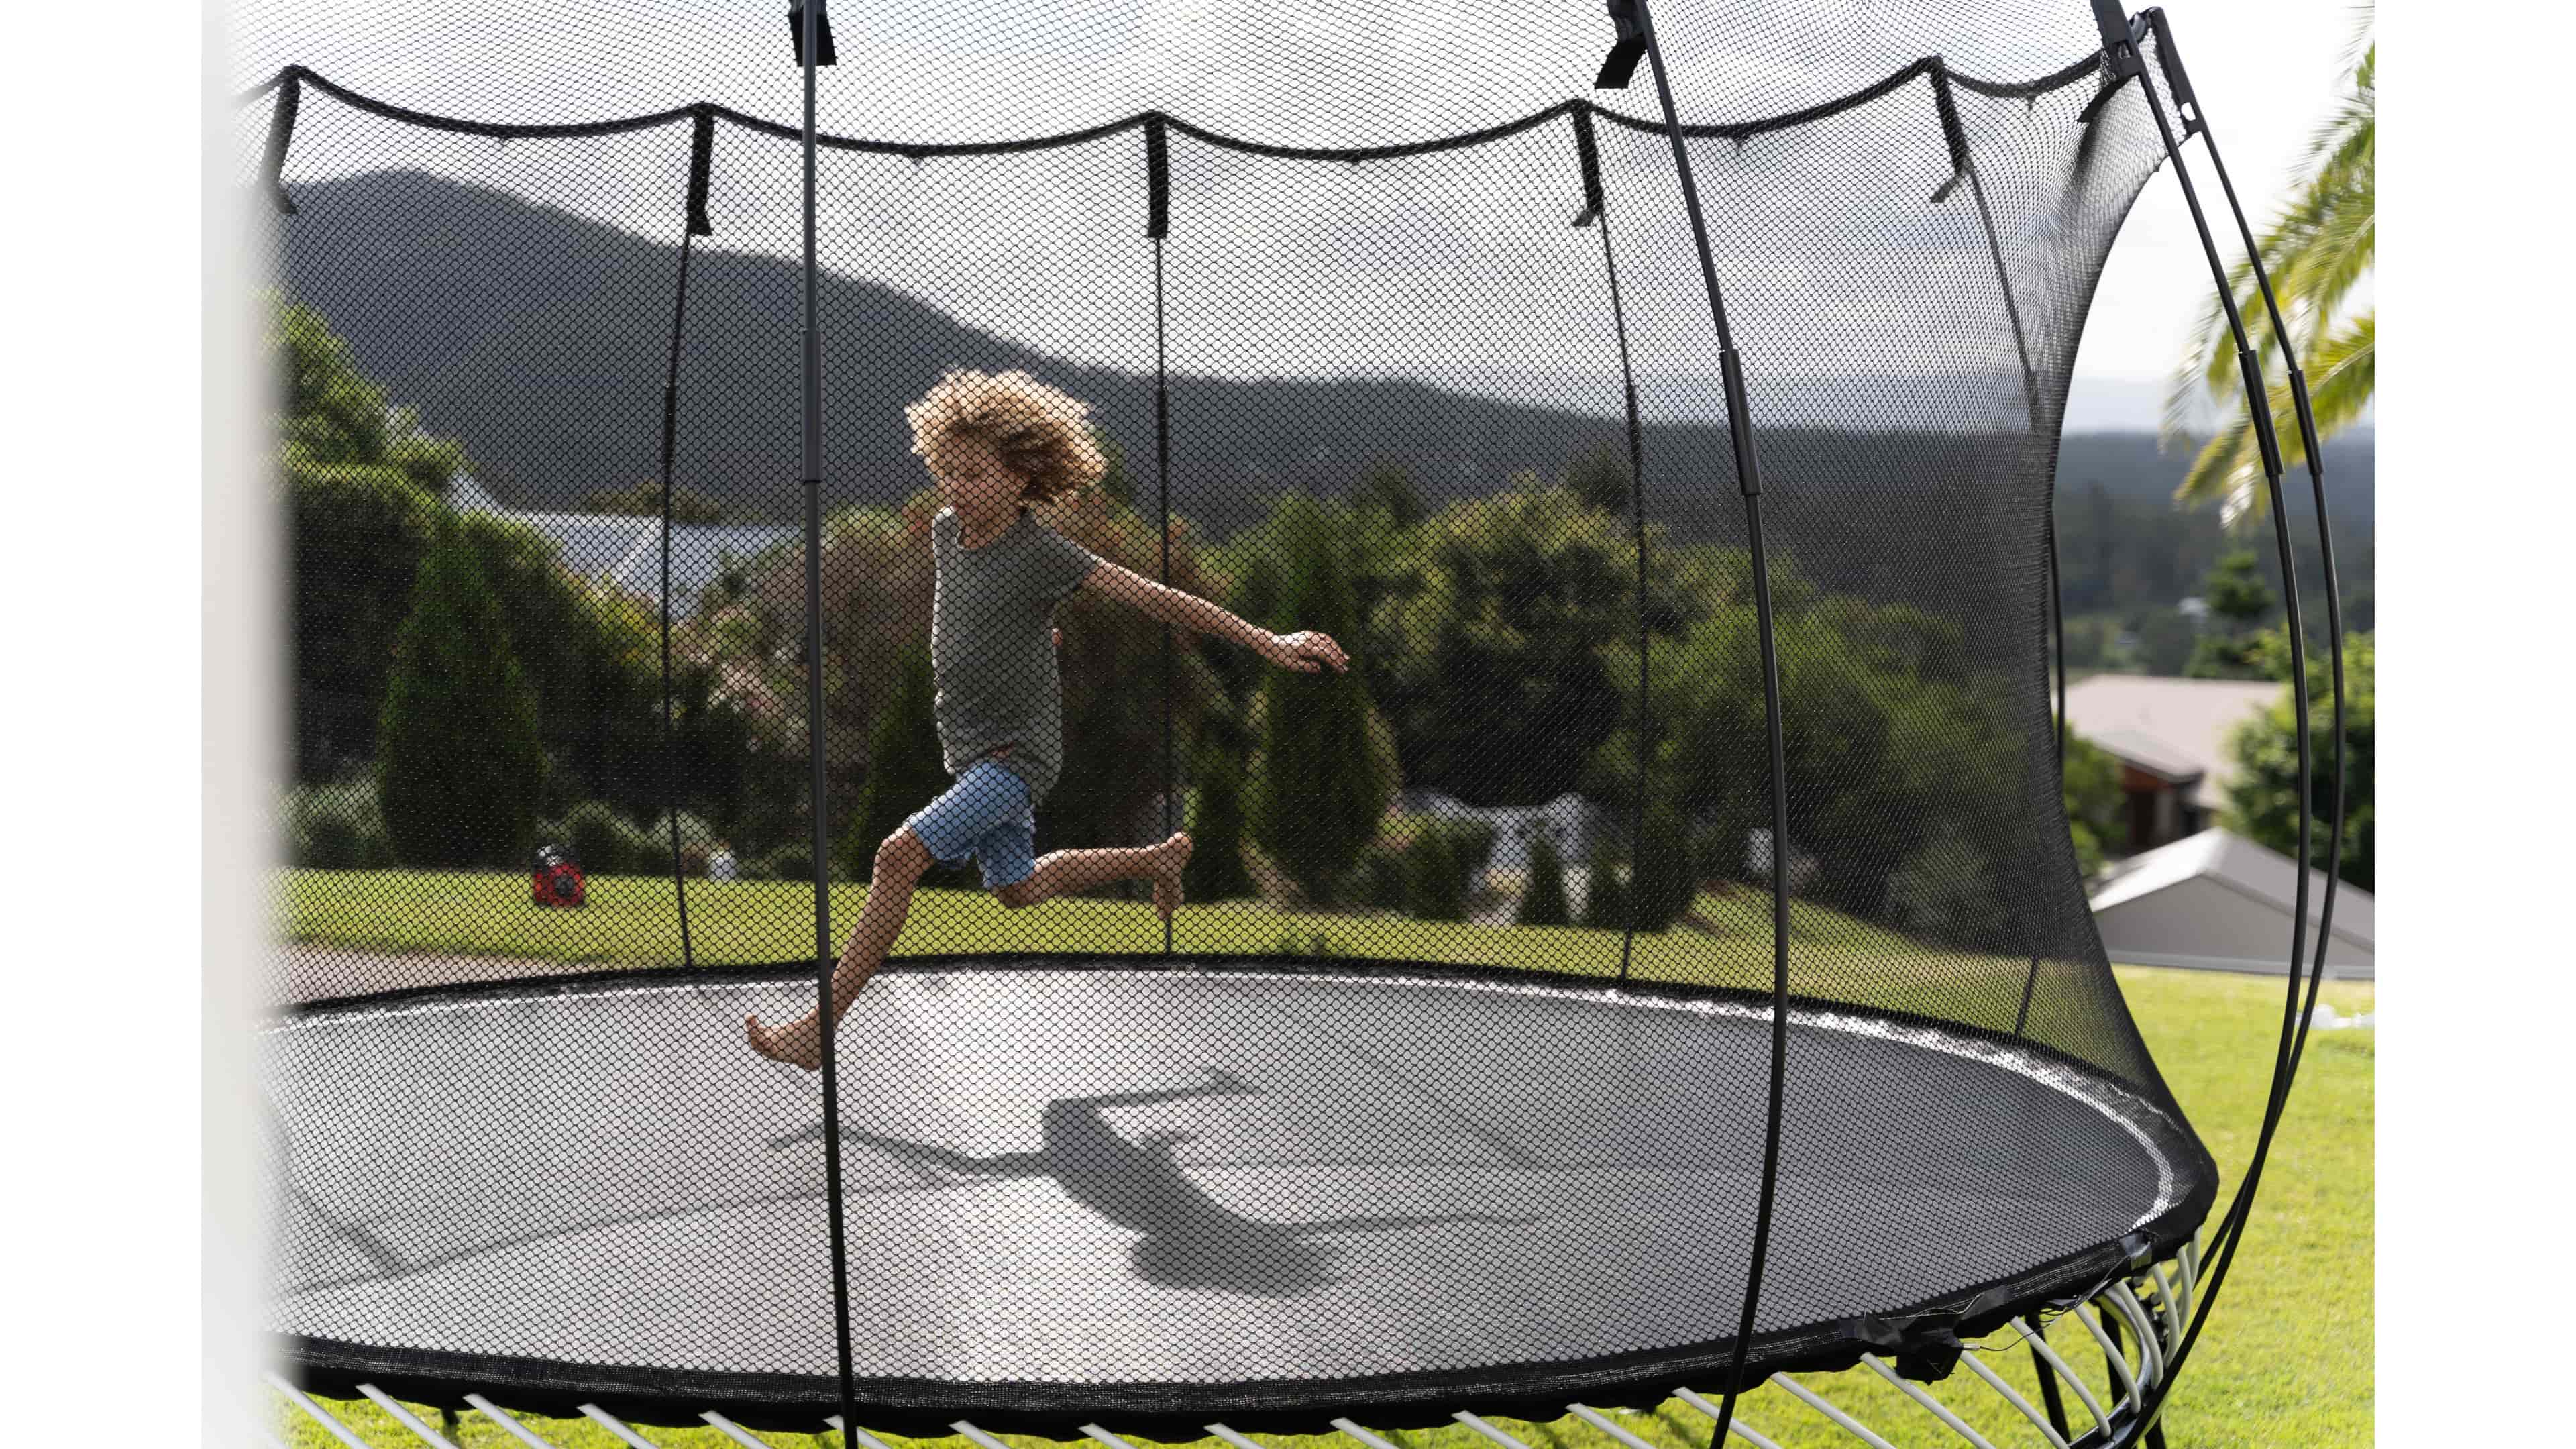 We Ranked the Best $1000 Trampolines to Buy This Year